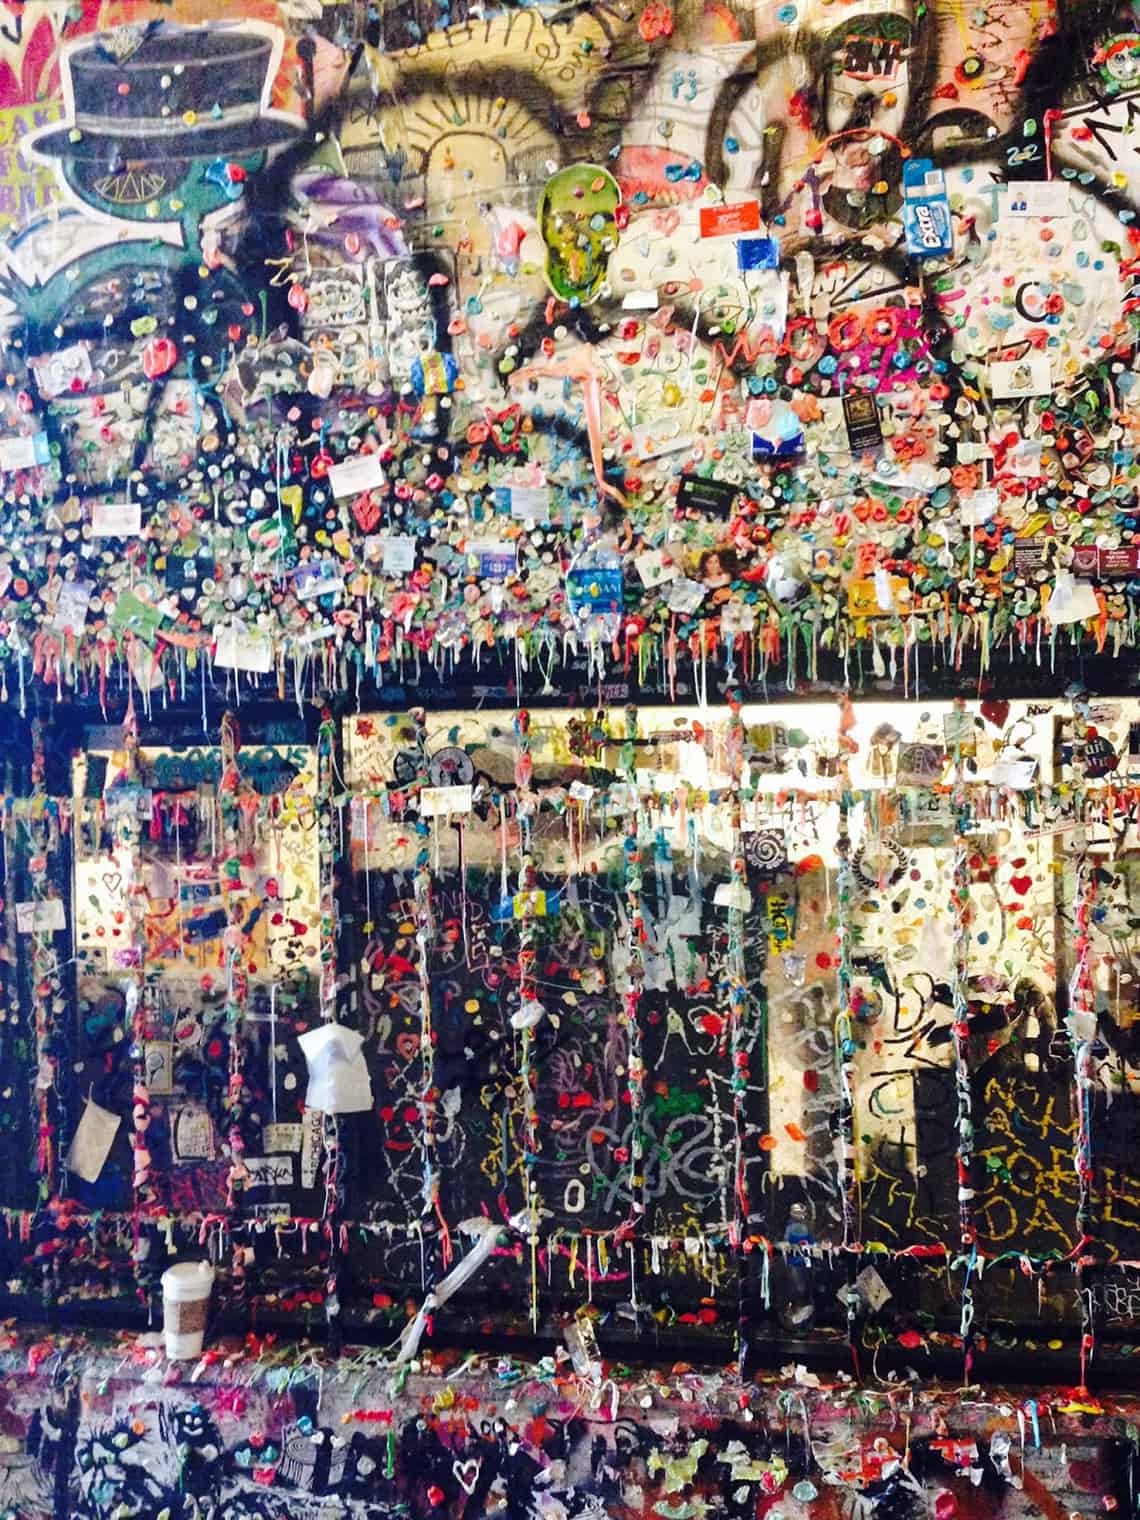 The Gum Wall downtown Seattle